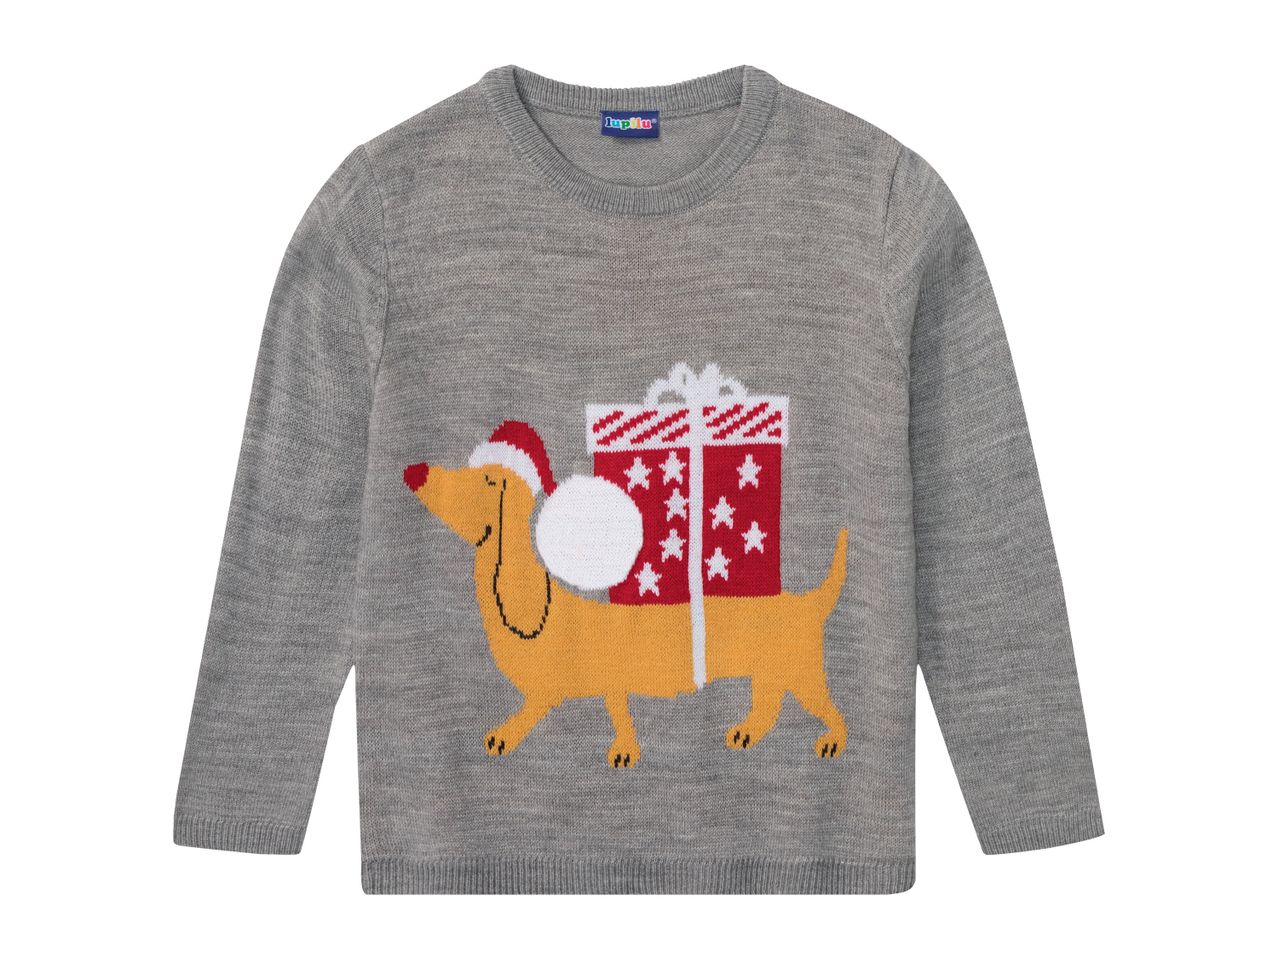 Go to full screen view: Lupilu Younger Kids’ Light-Up Christmas Jumper - Image 4